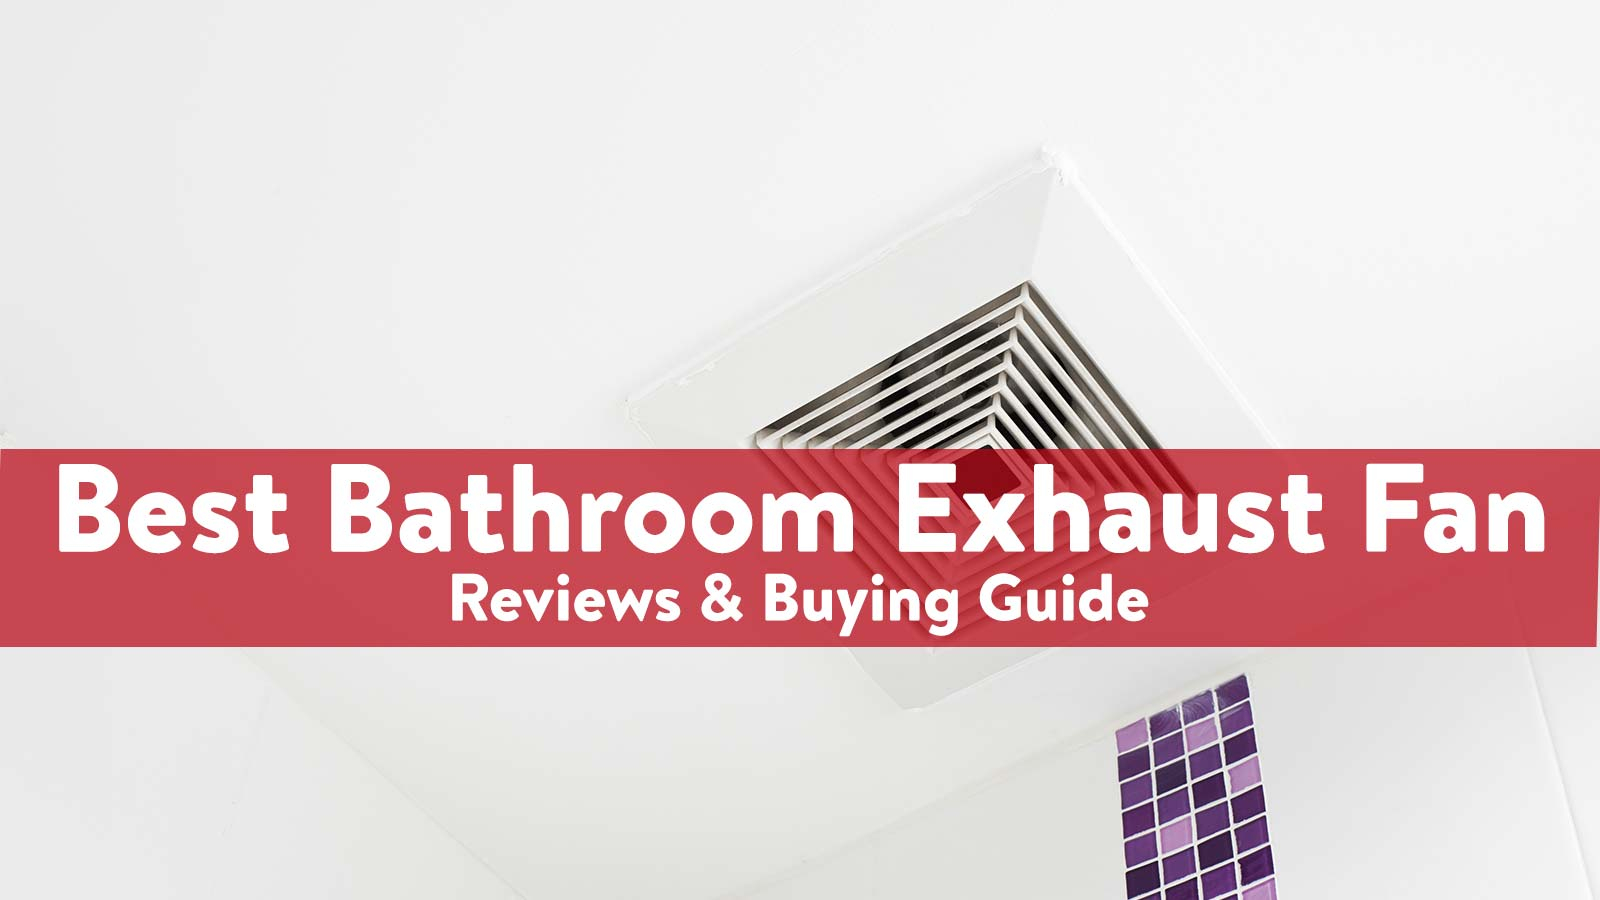 10 Best Bathroom Exhaust Fans Reviews Buying Guide 2020 throughout size 1600 X 900